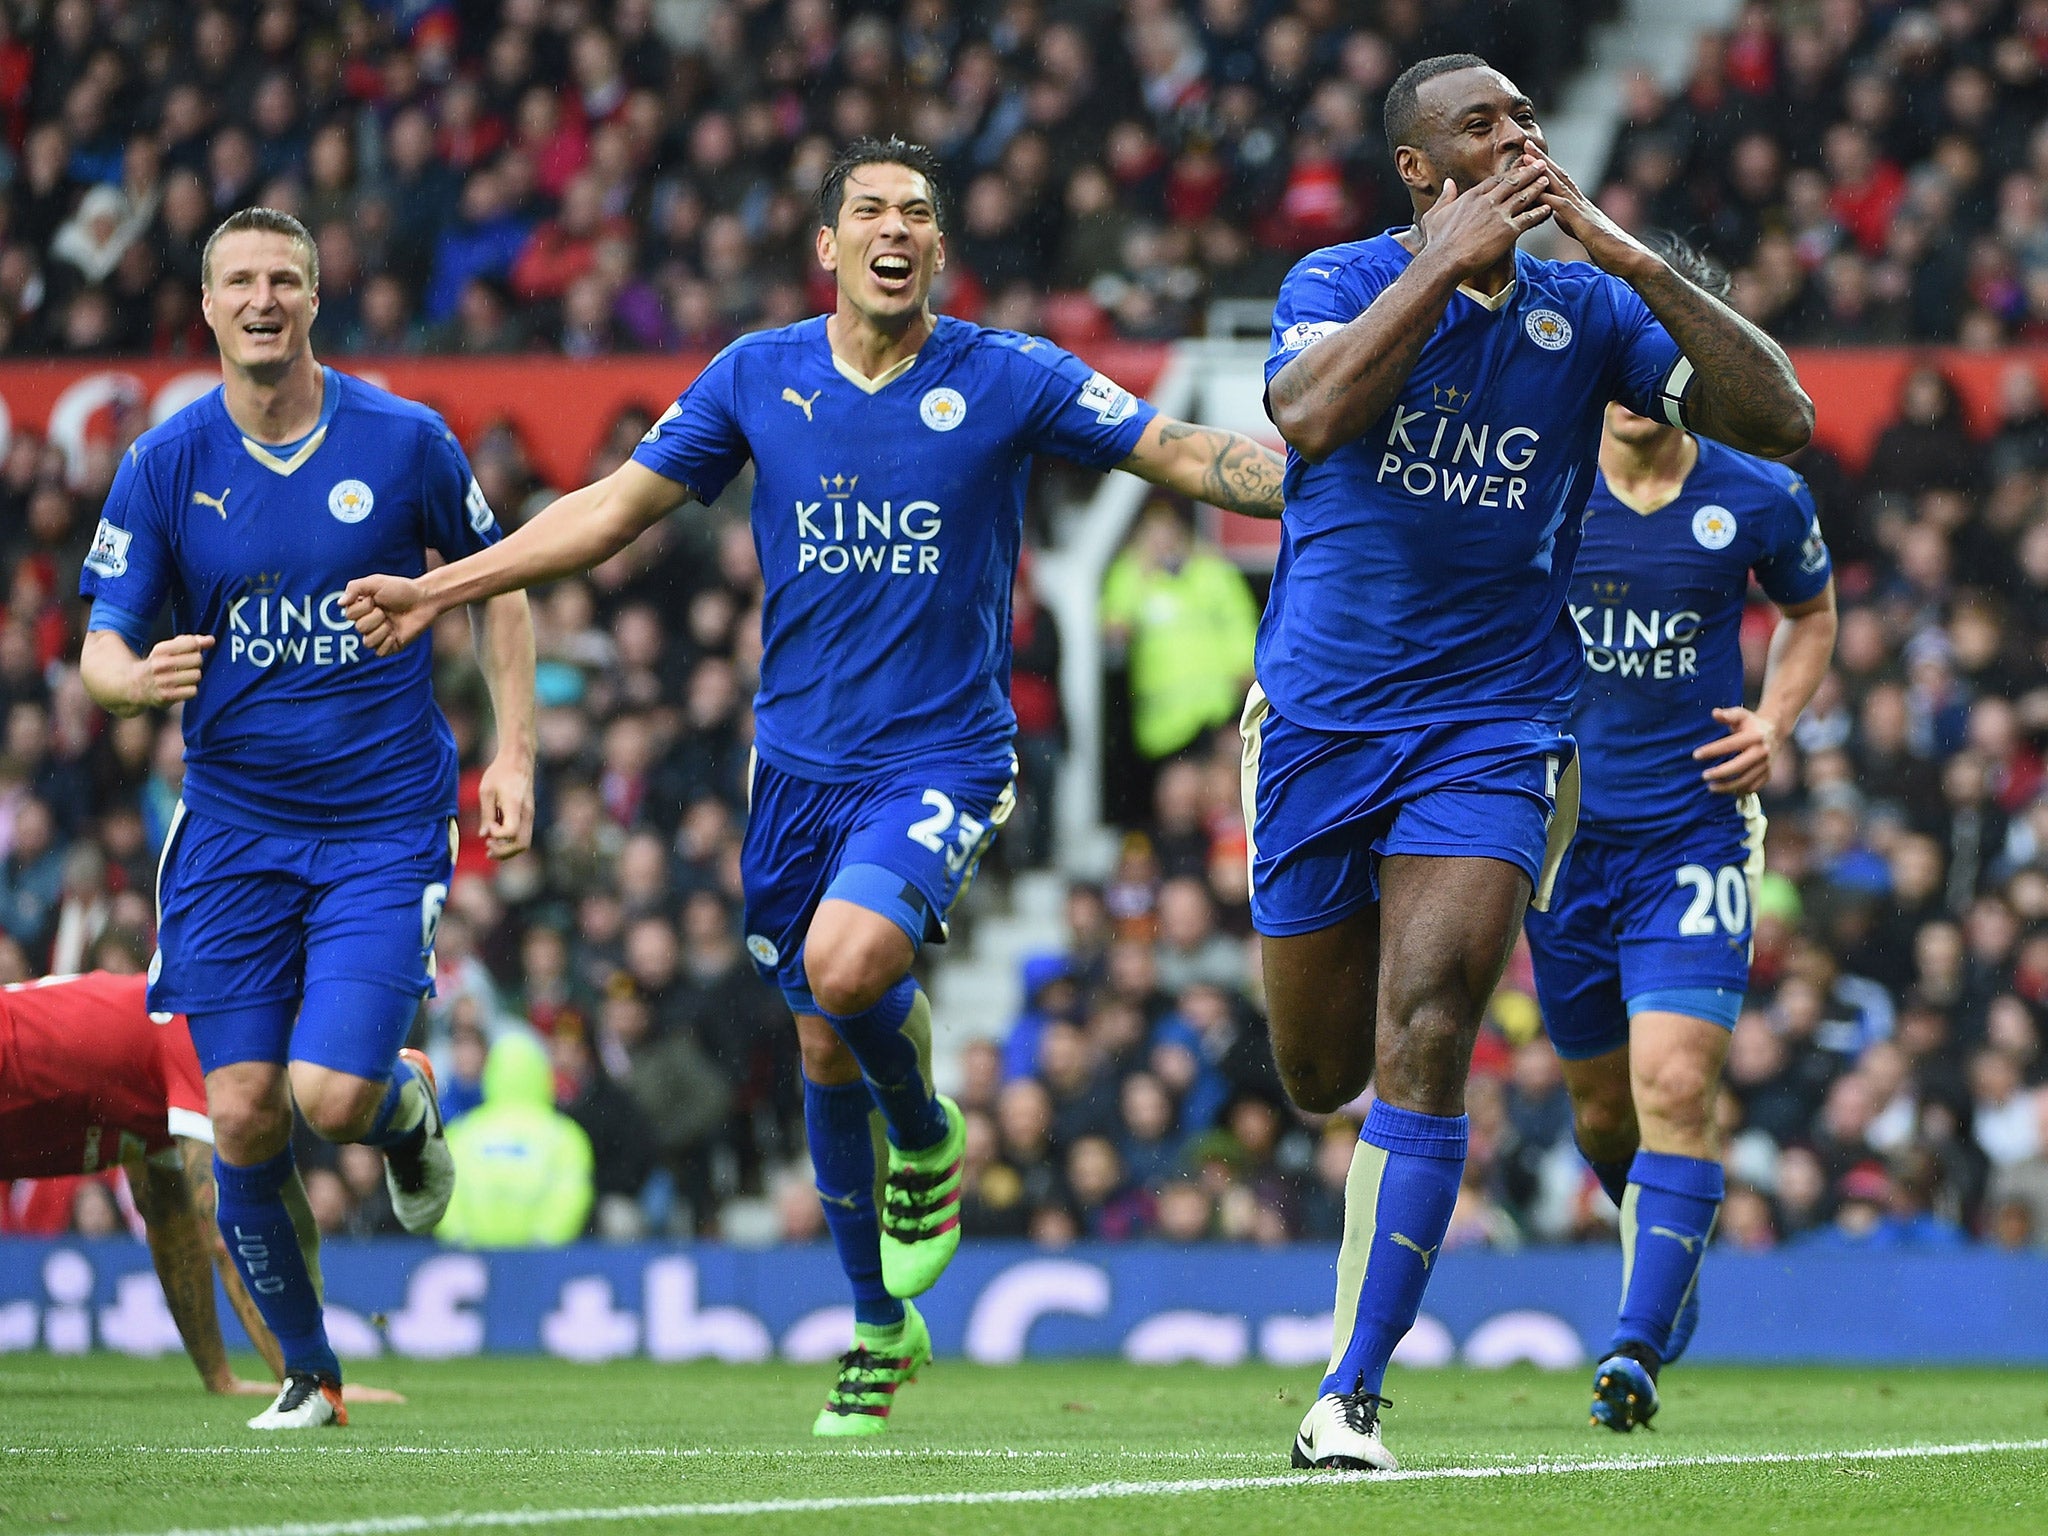 Wes Morgan has led Leicester City to the first top-flight title in their history